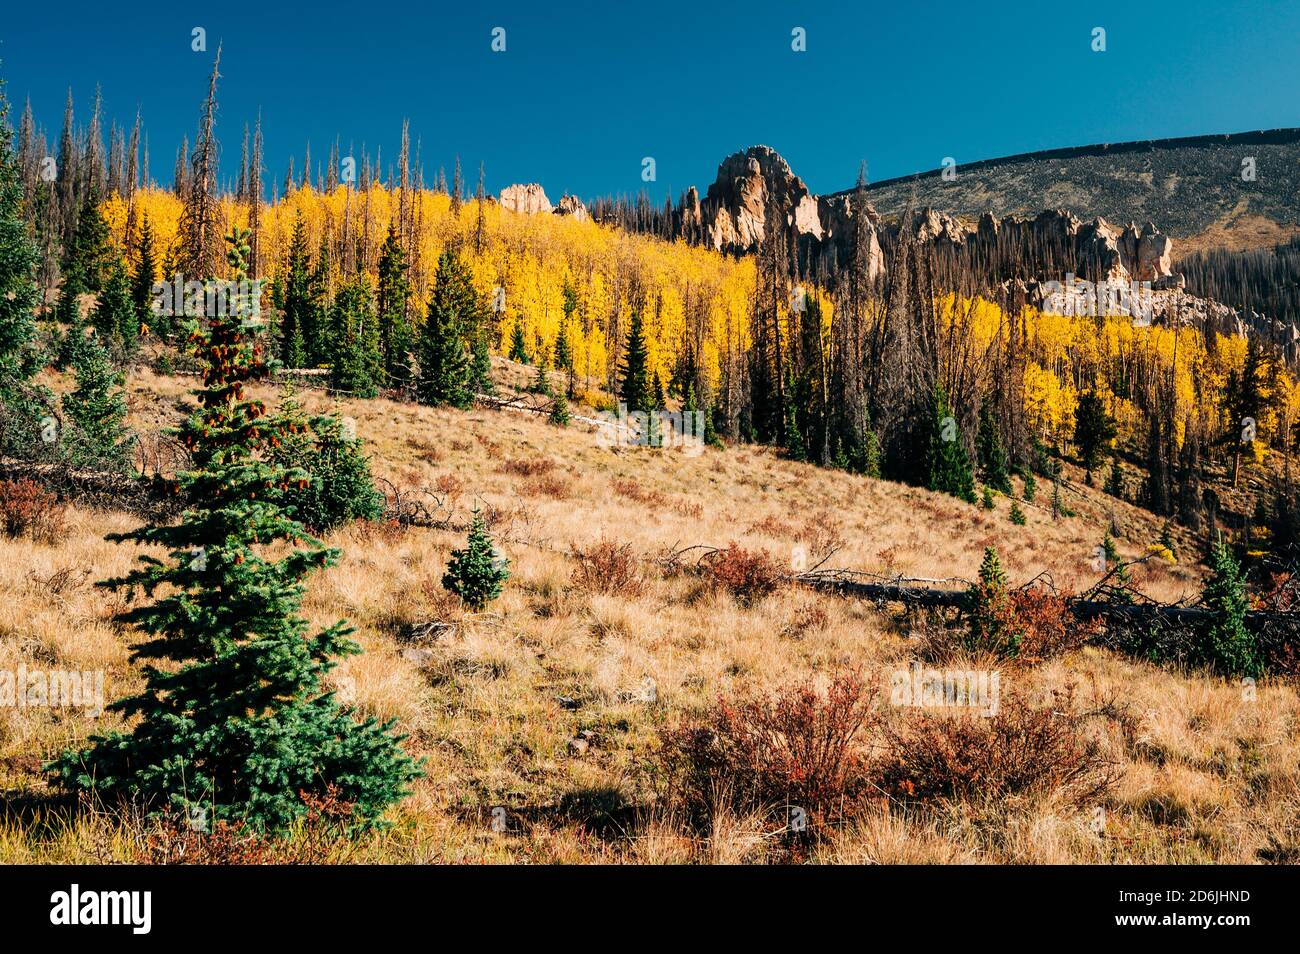 A warm fall scene of yellow aspen leaves as a foreground to Wheeler Geologic Area in remote Colorado Stock Photo